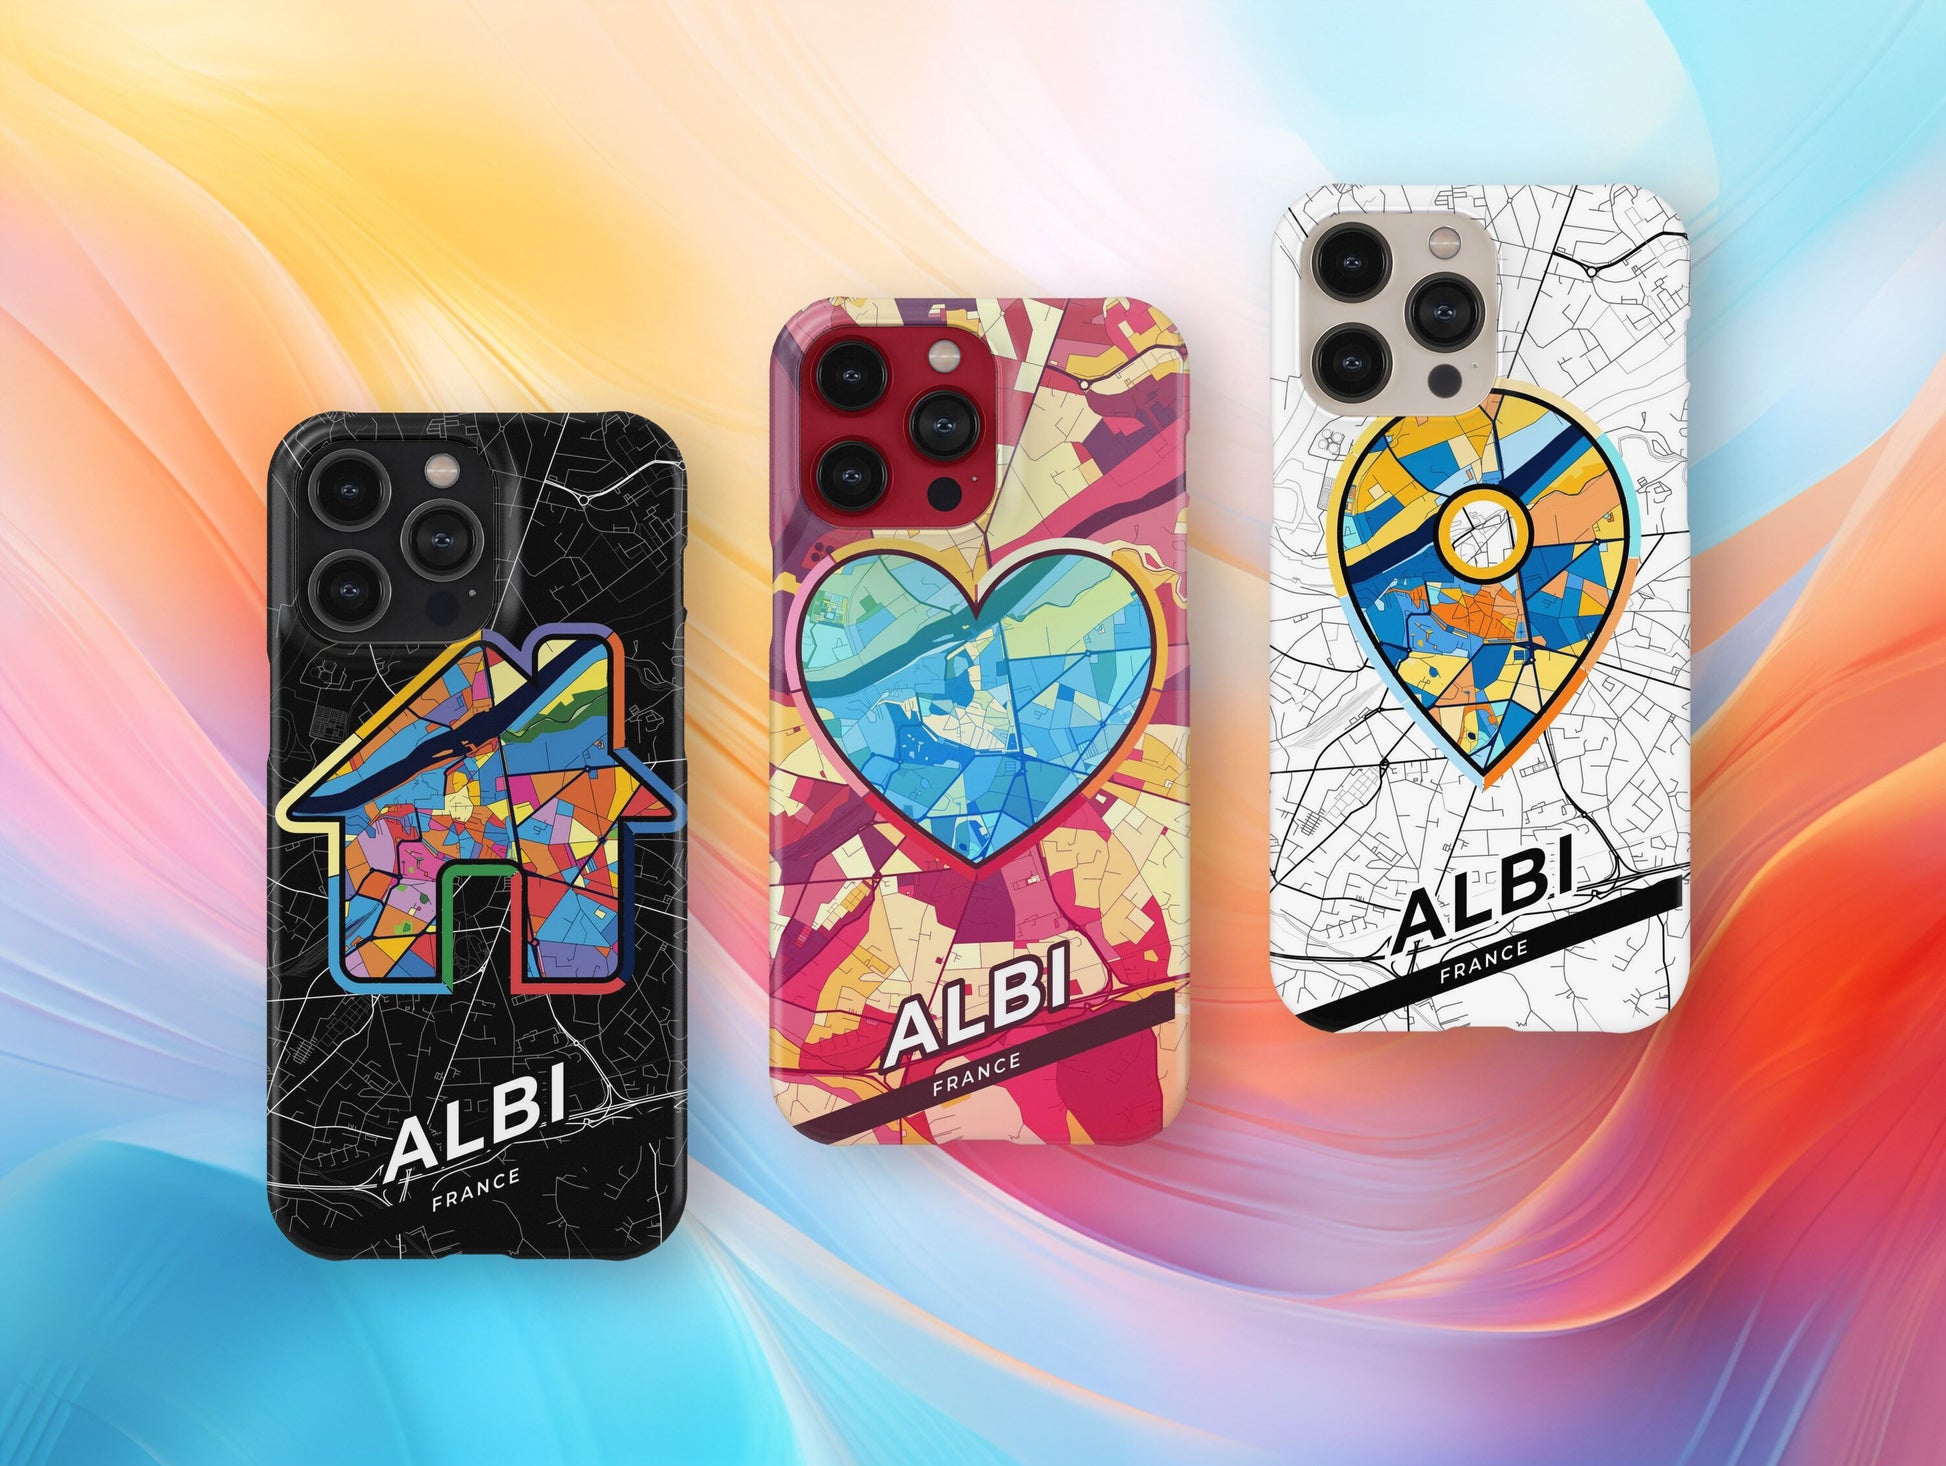 Albi France slim phone case with colorful icon. Birthday, wedding or housewarming gift. Couple match cases.